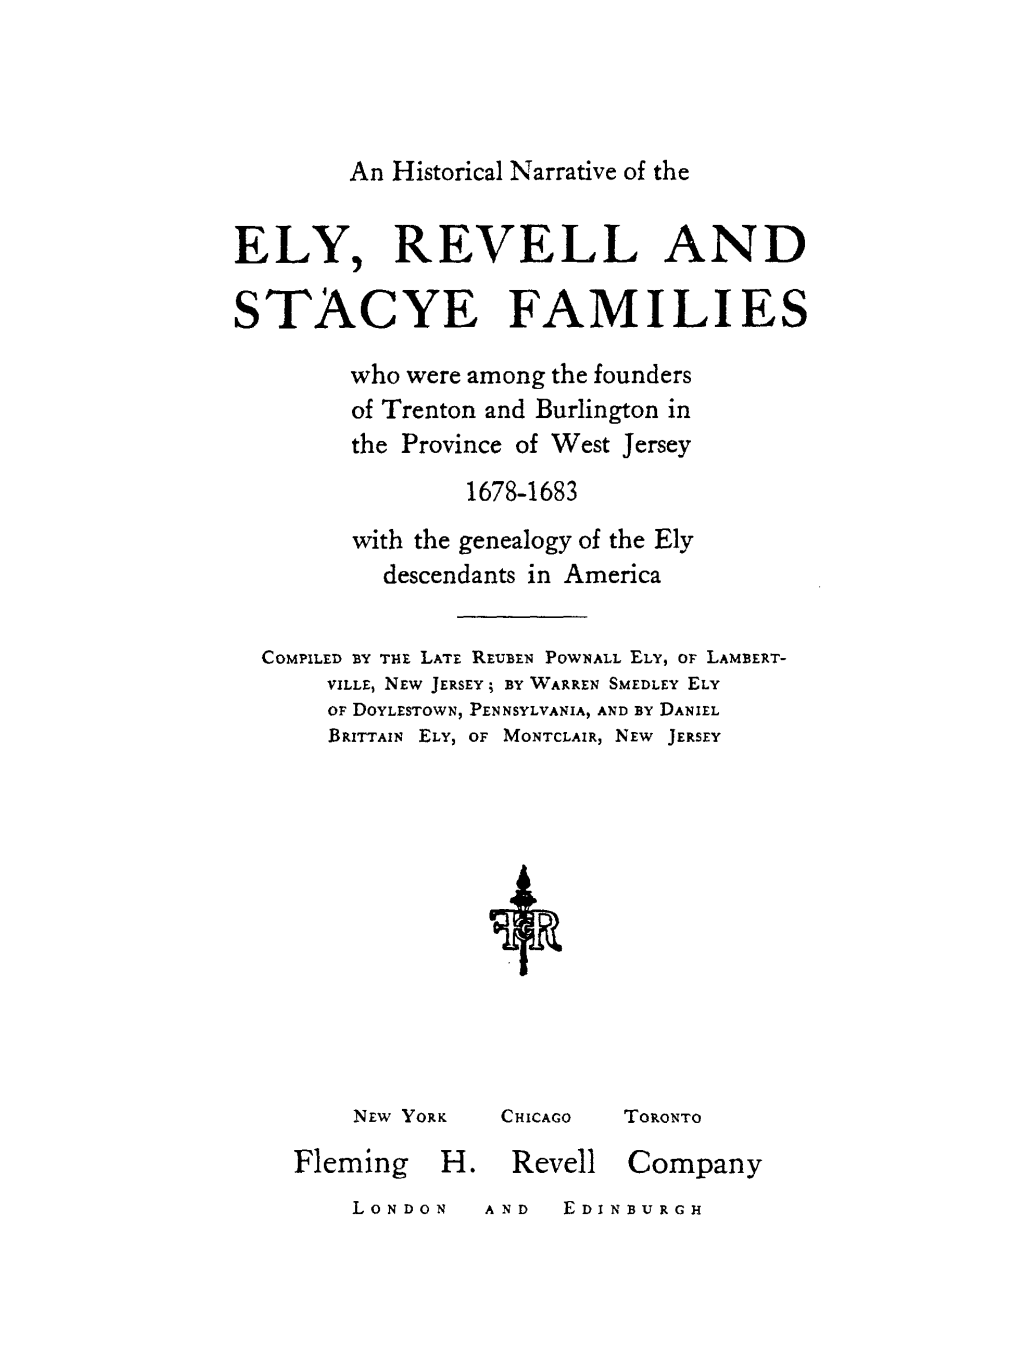 Ely, Revell and Stacye Families